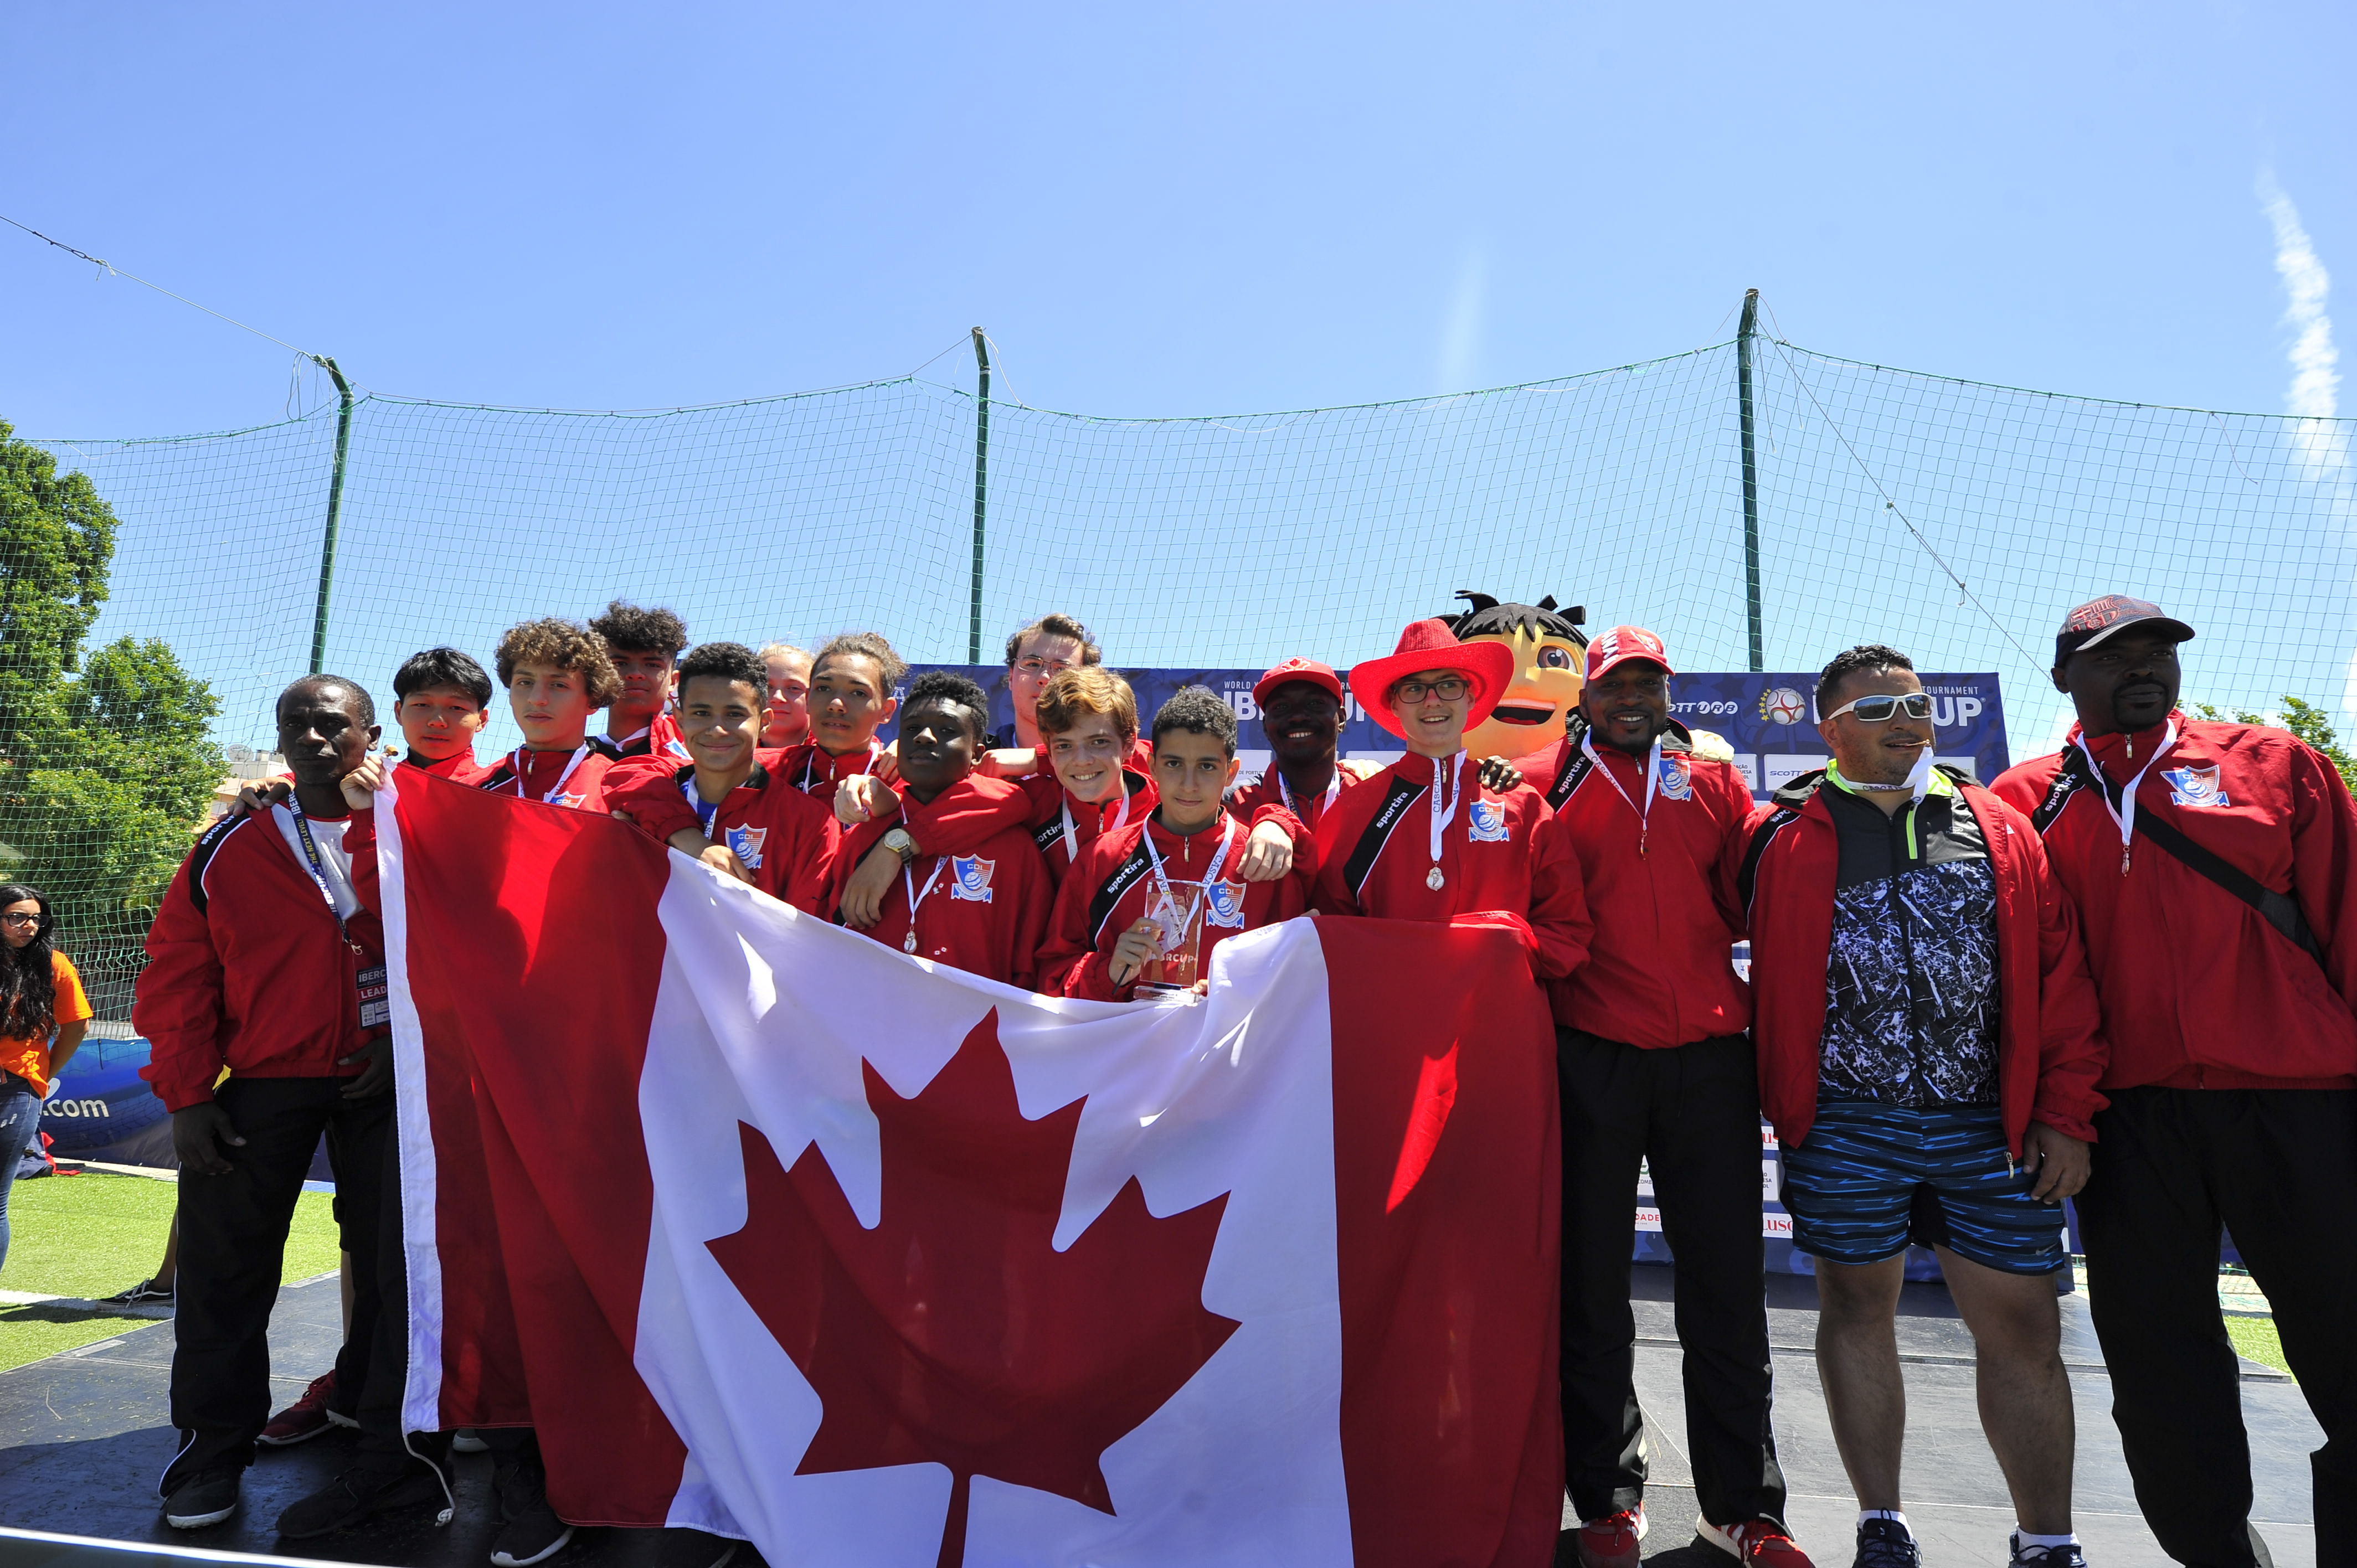 IberCup Estoril - Canada team with the flag - Road to Sport